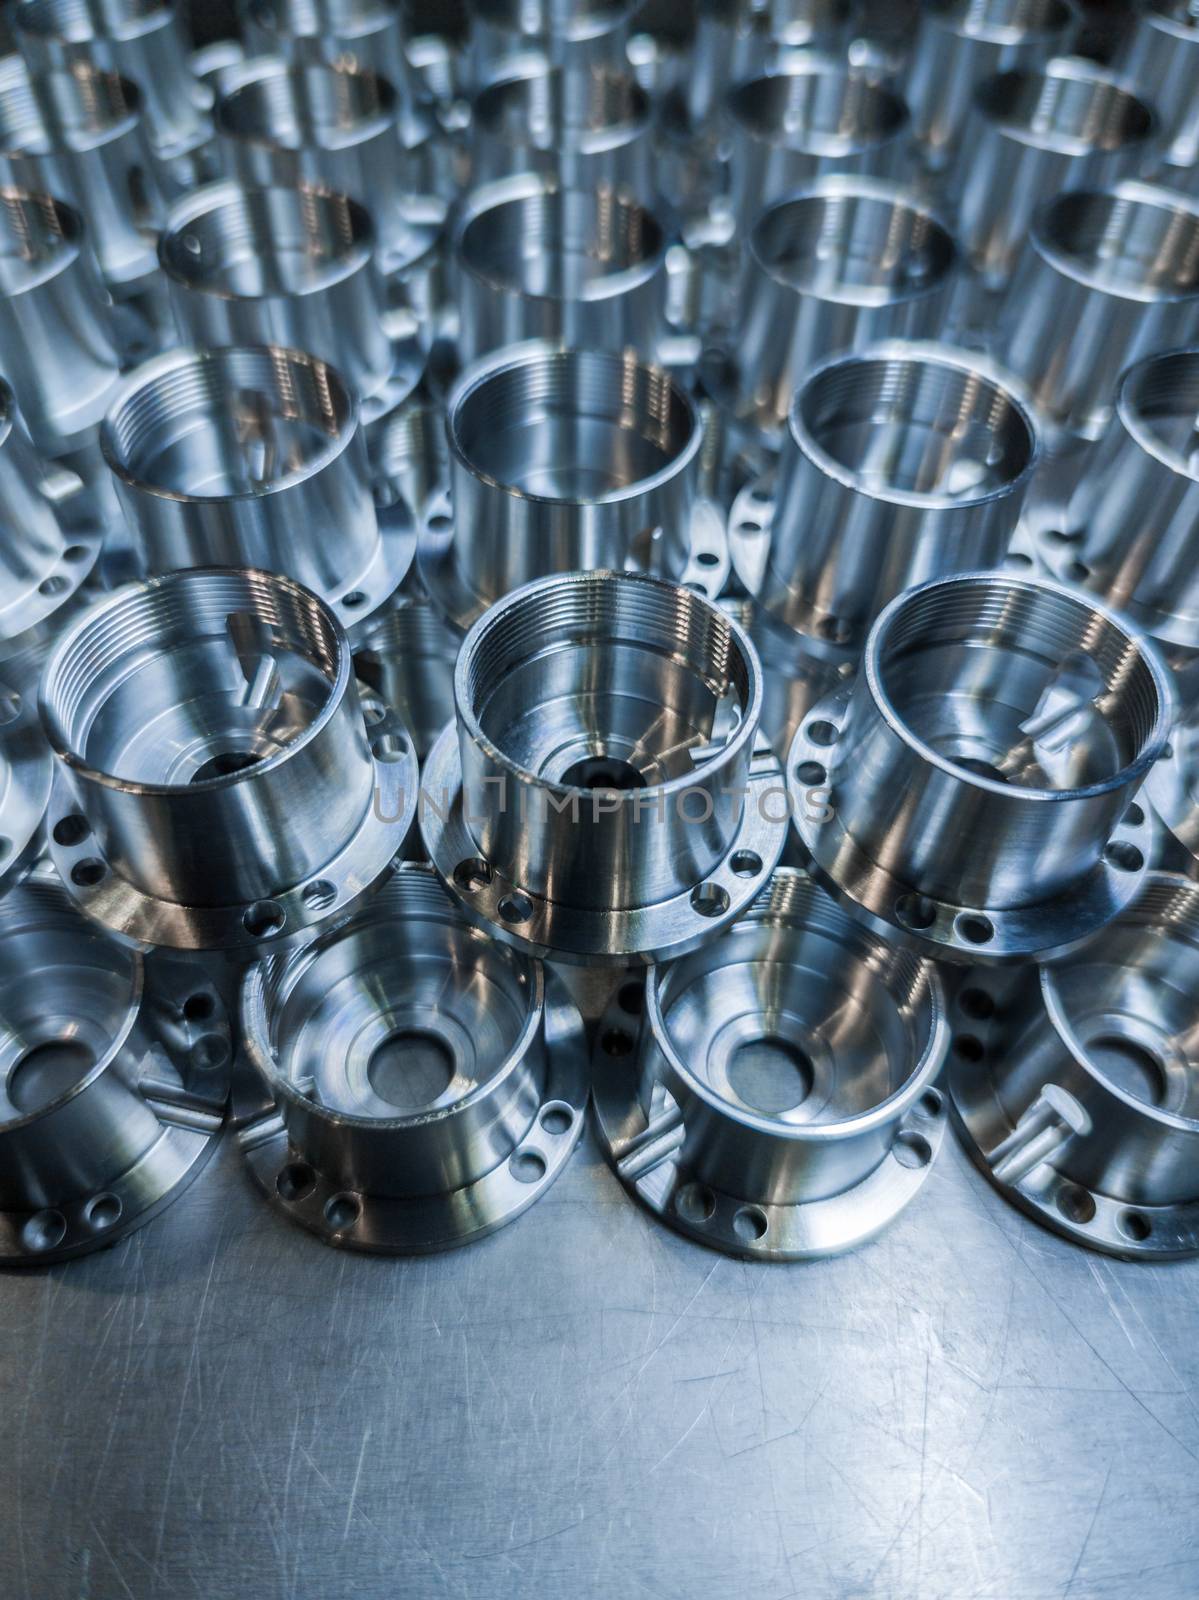 a large batch of shiny metal cnc aerospace parts - close-up with selective focus for industrial manufacturing background by z1b